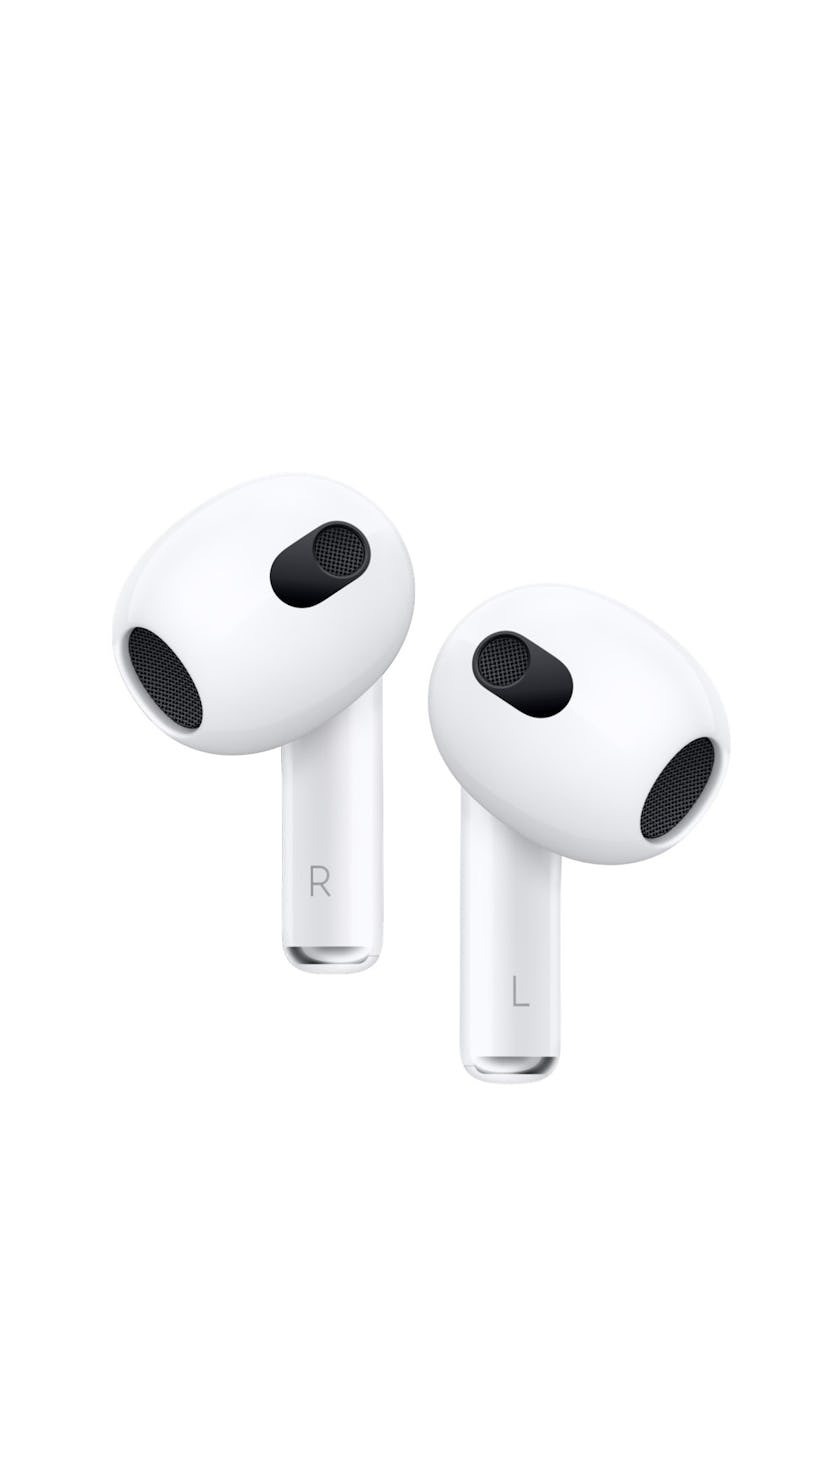 Apple's AirPods 3, the new redesigned earbuds